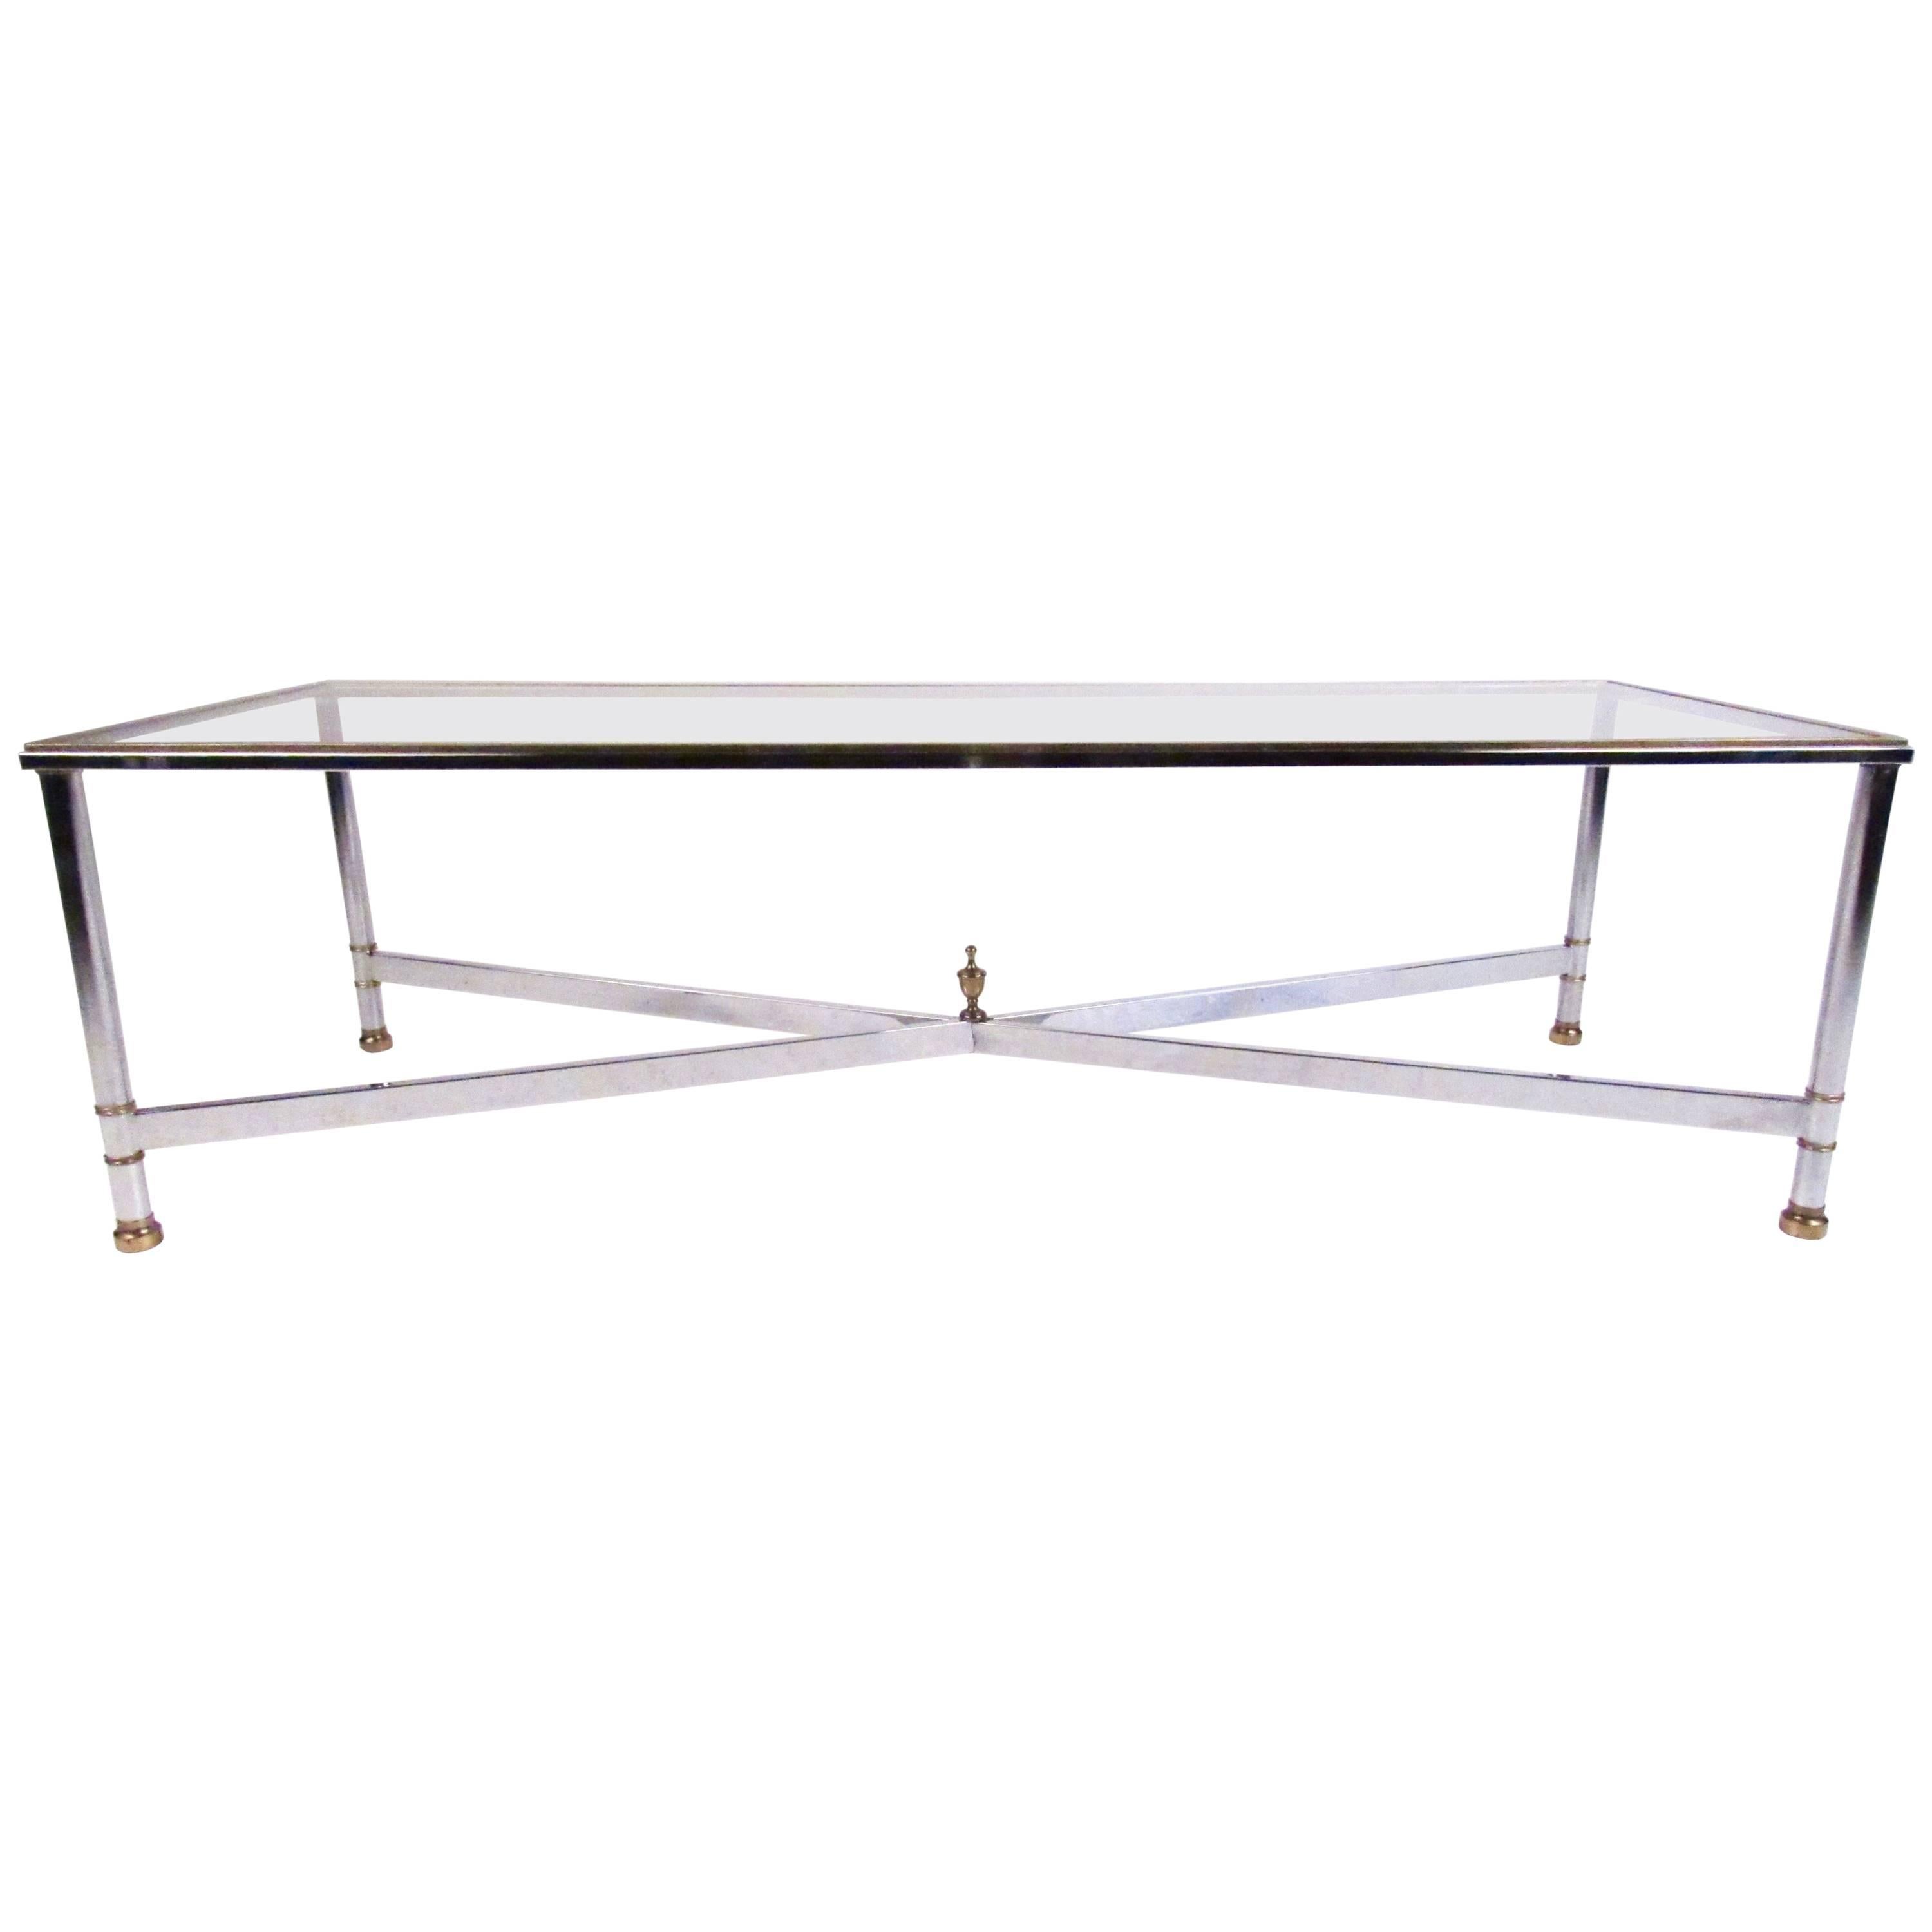 This vintage rectangular coffee table features sturdy chrome construction with beautiful brass trim. X-style stretcher adds stability and Mid-Century style to the piece while the unique size of the table makes it an impressive addition to any